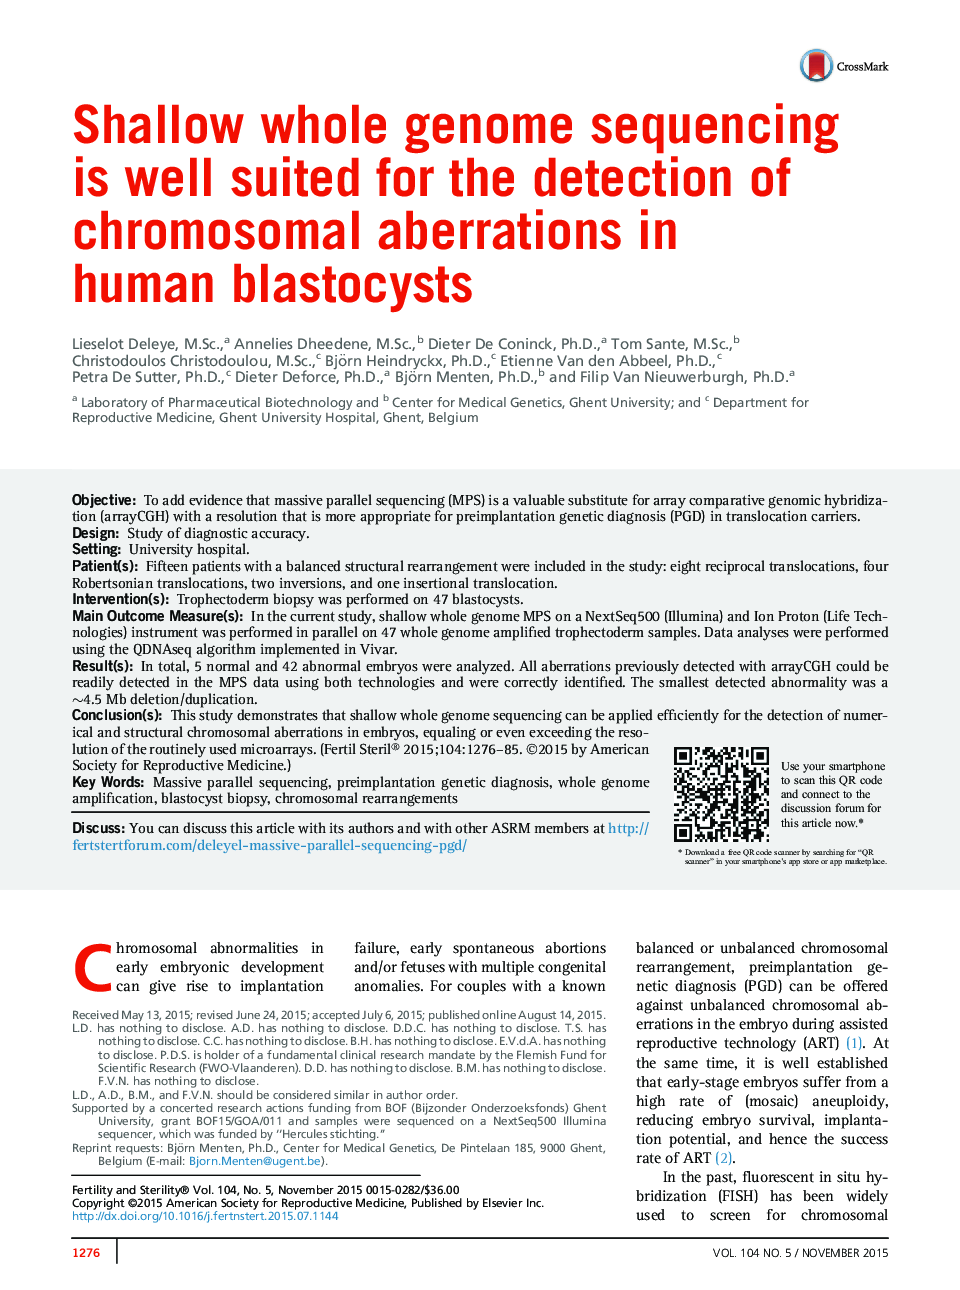 Shallow whole genome sequencing is well suited for the detection of chromosomal aberrations in human blastocysts